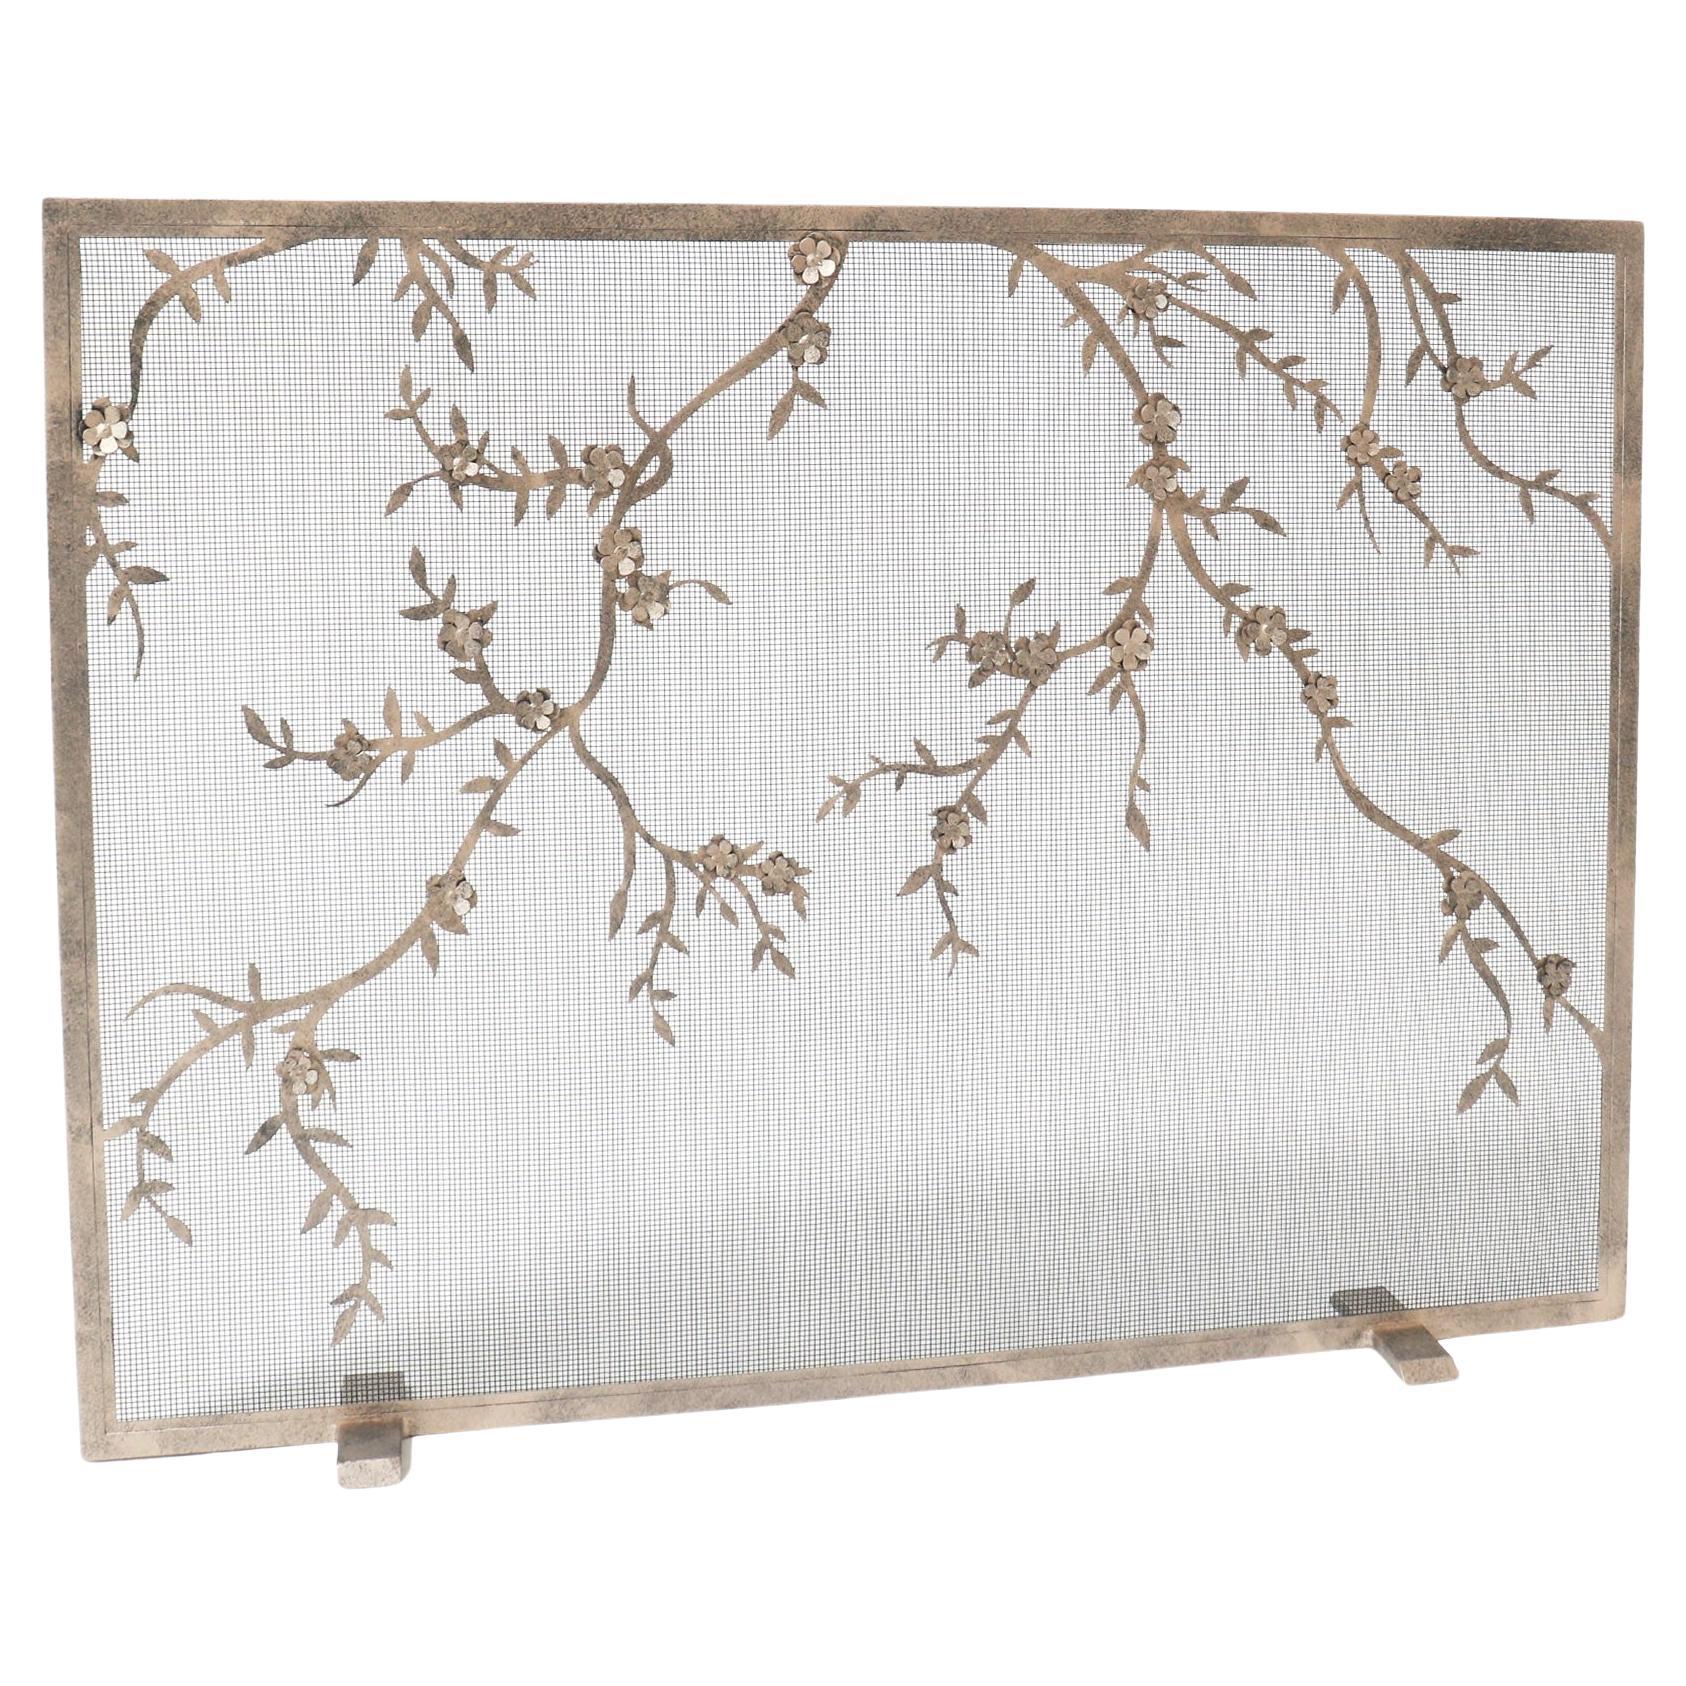 Plum Blossom Fireplace Screen in Aged Silver